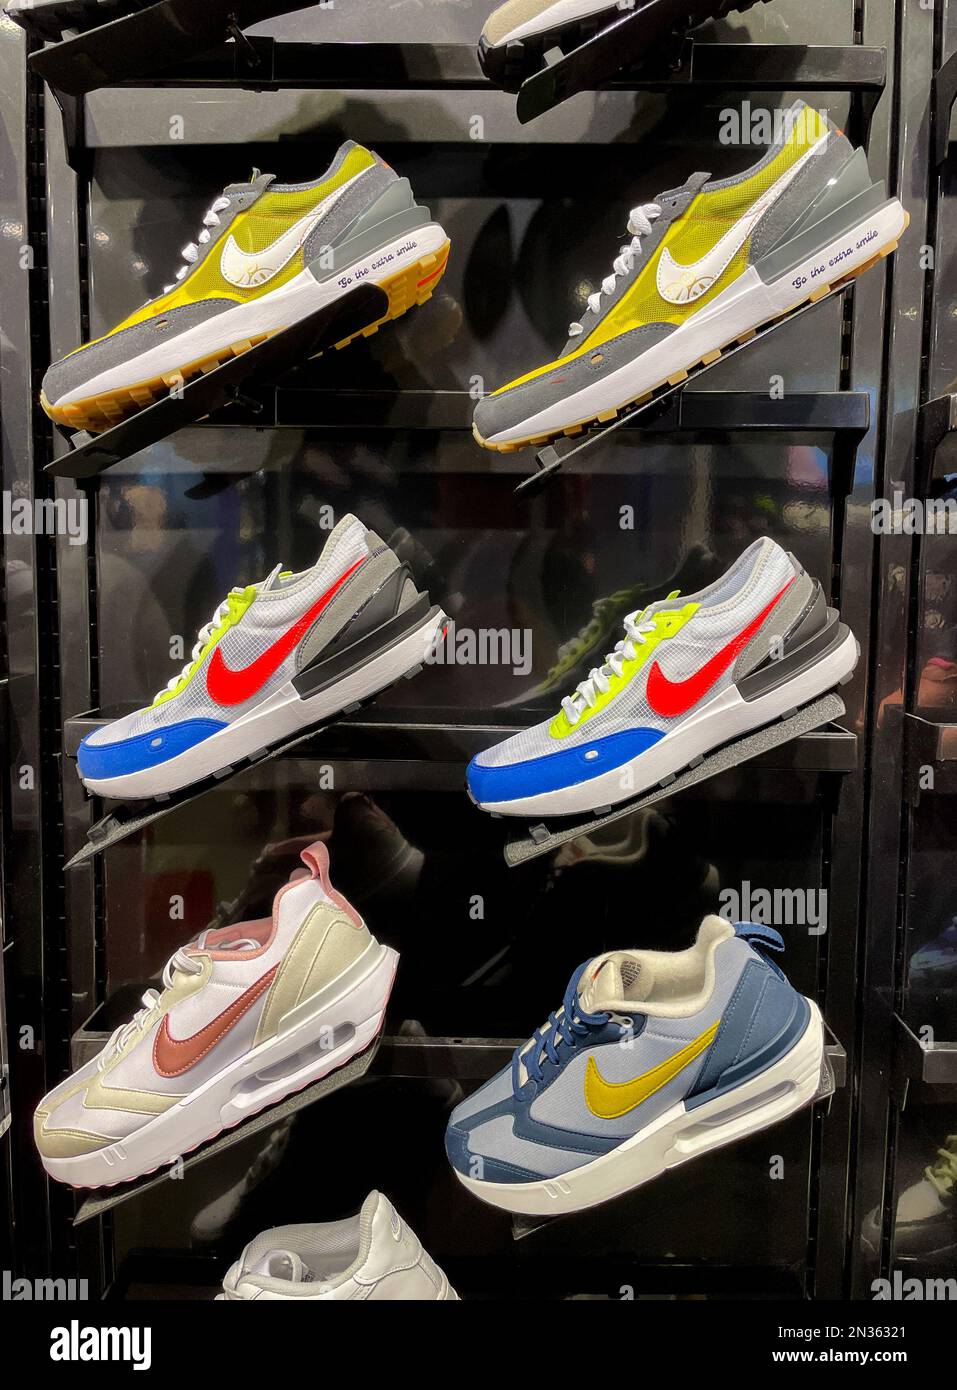 Nike shoes at foot locker hi-res stock and images - Alamy